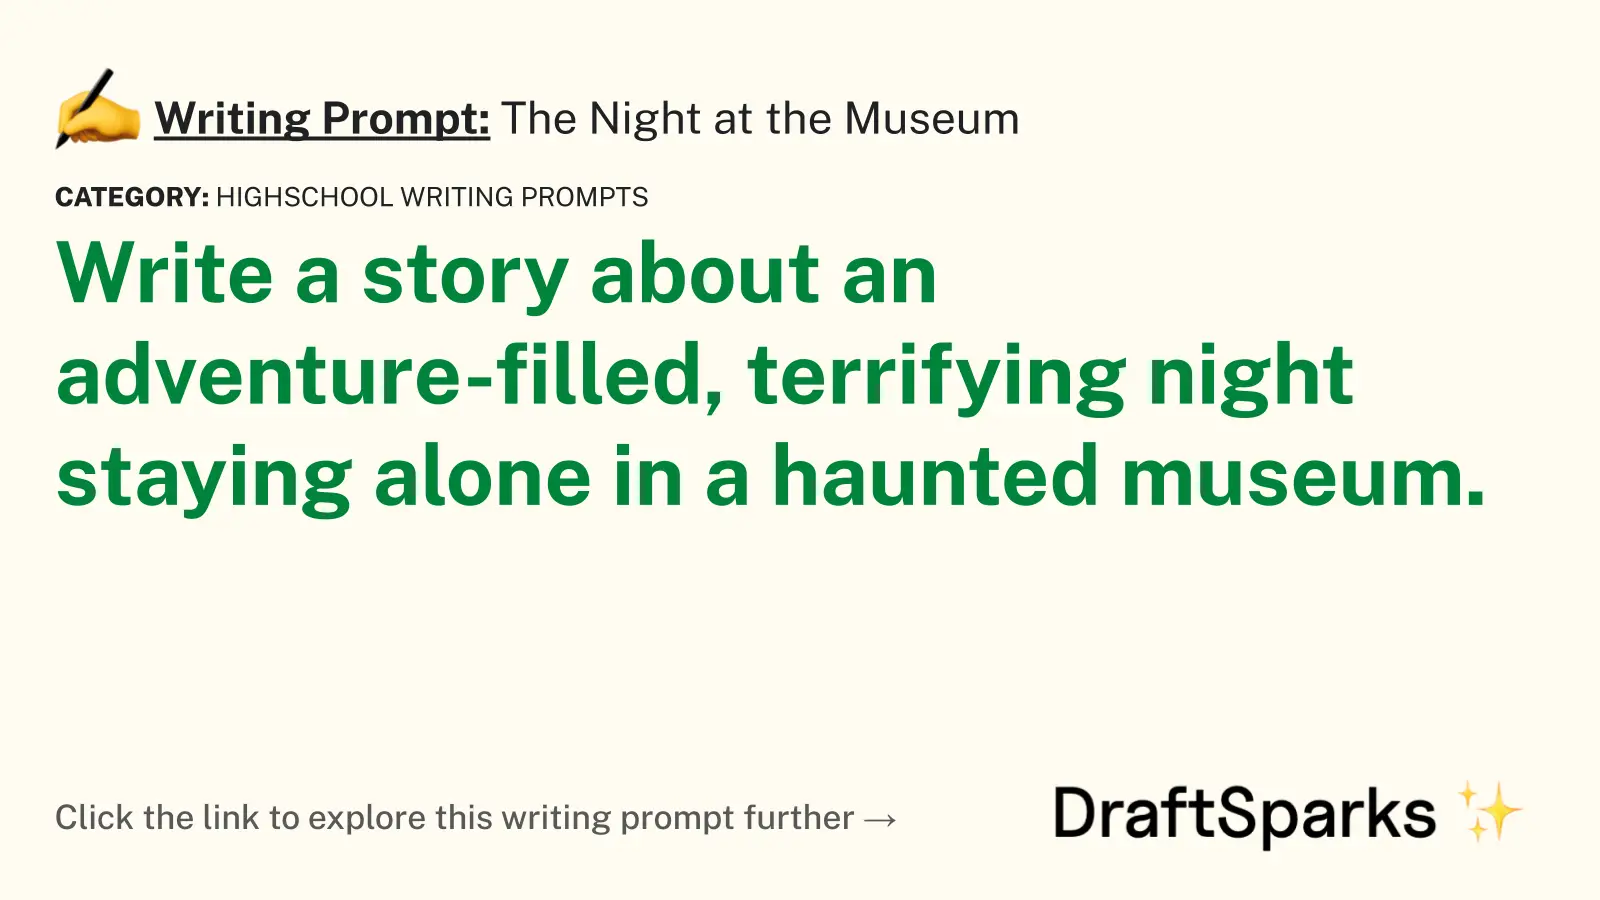 The Night at the Museum